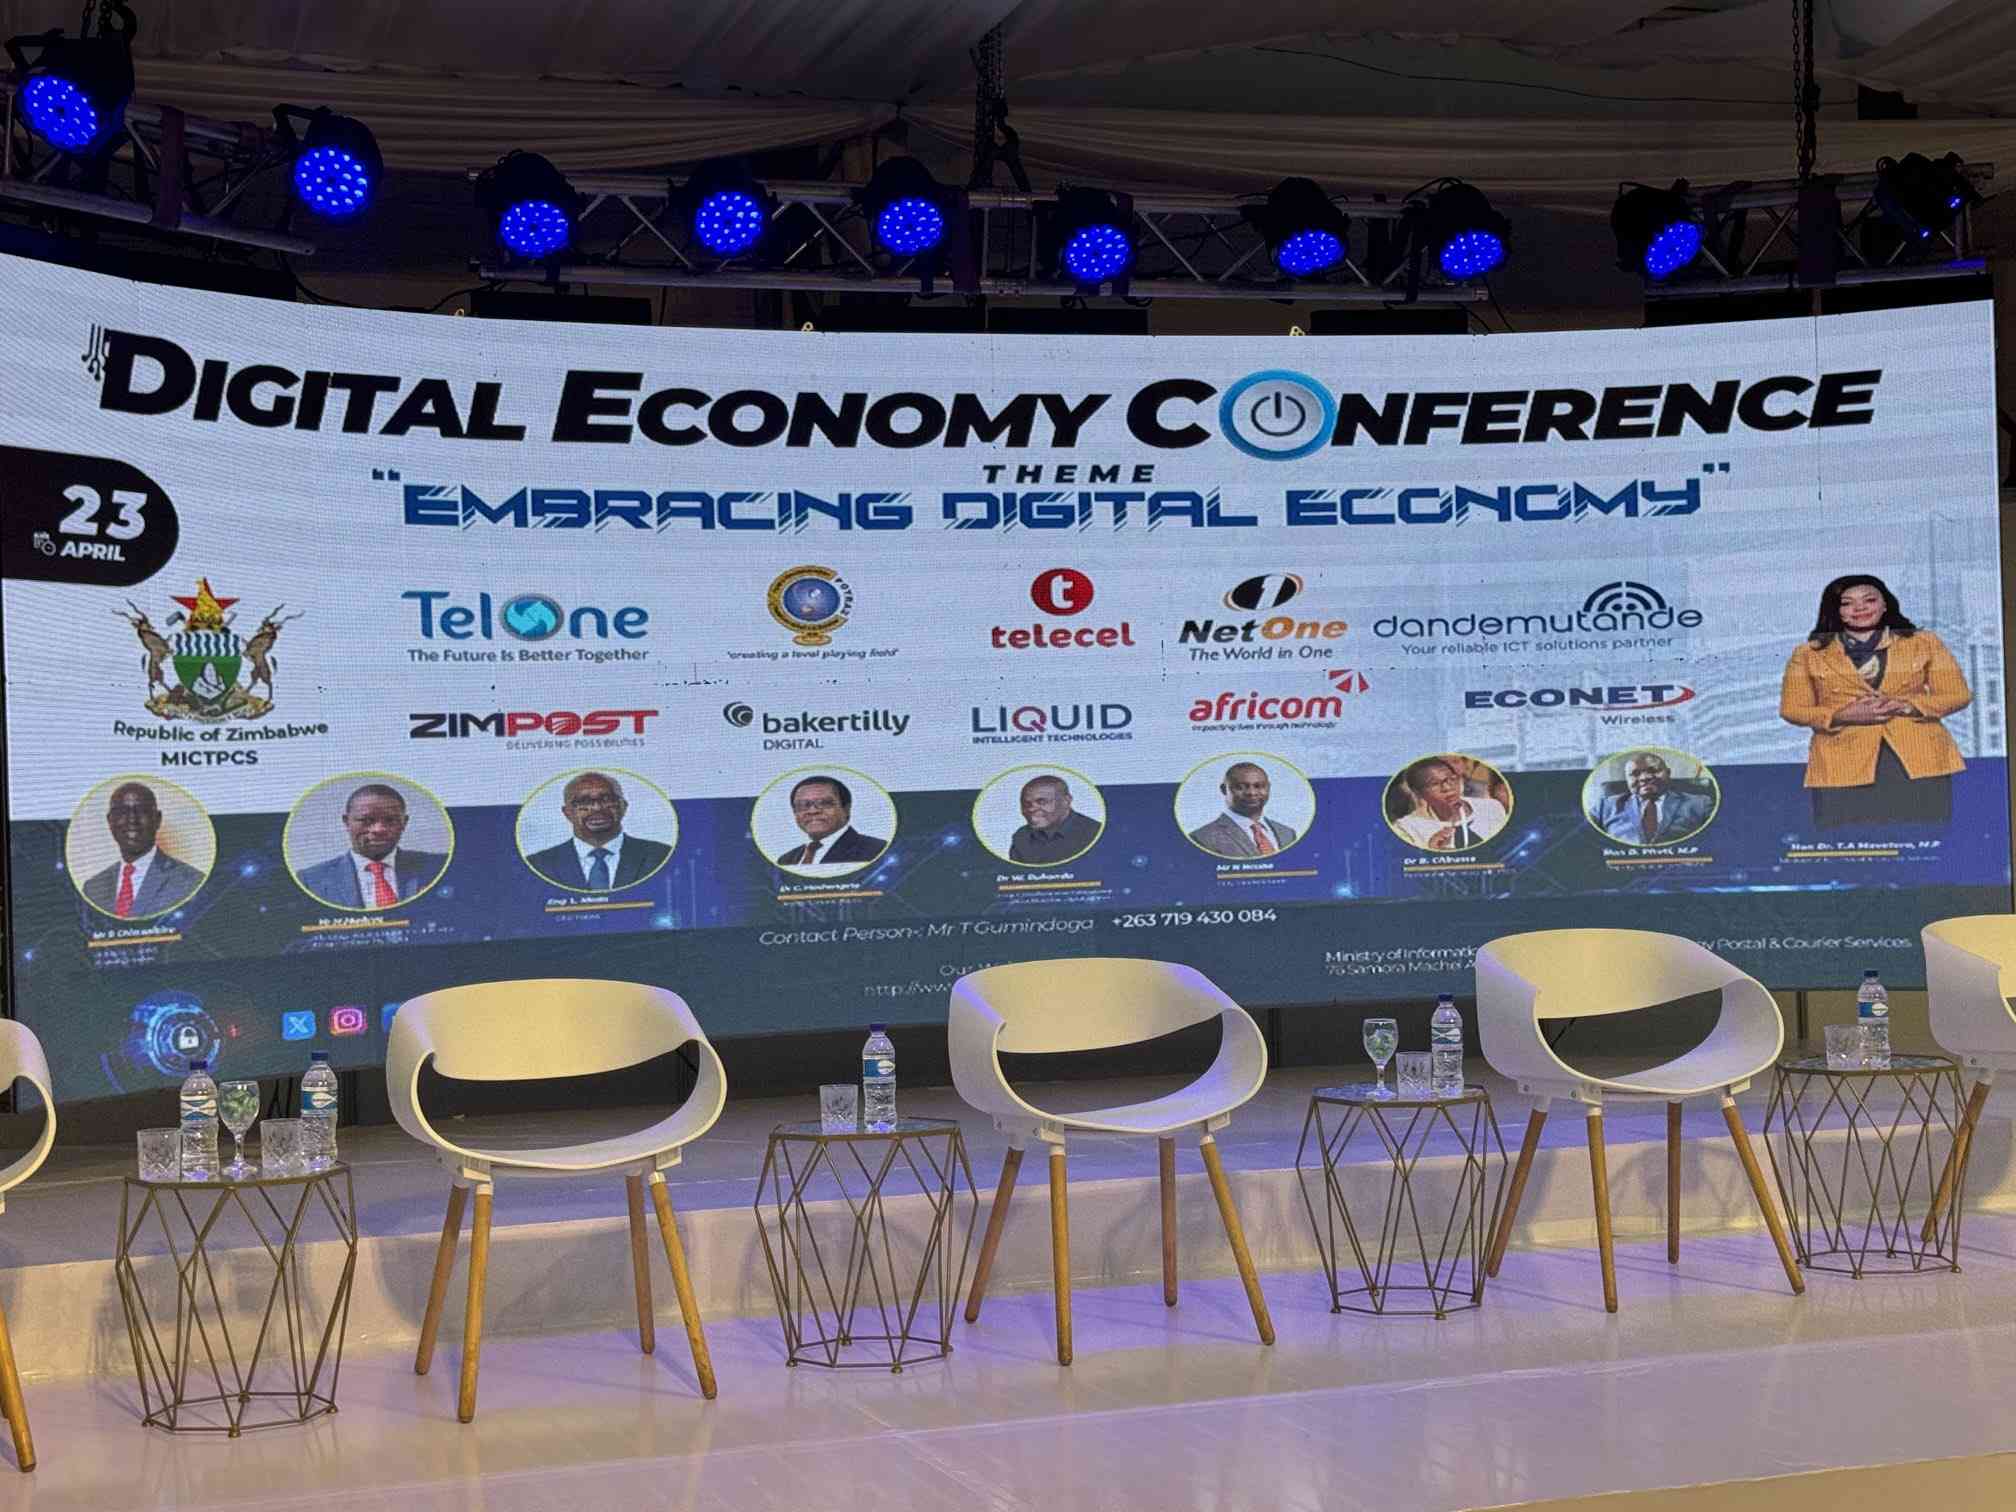 Digital Economy Conference demonstrates important collaboration among key sector players